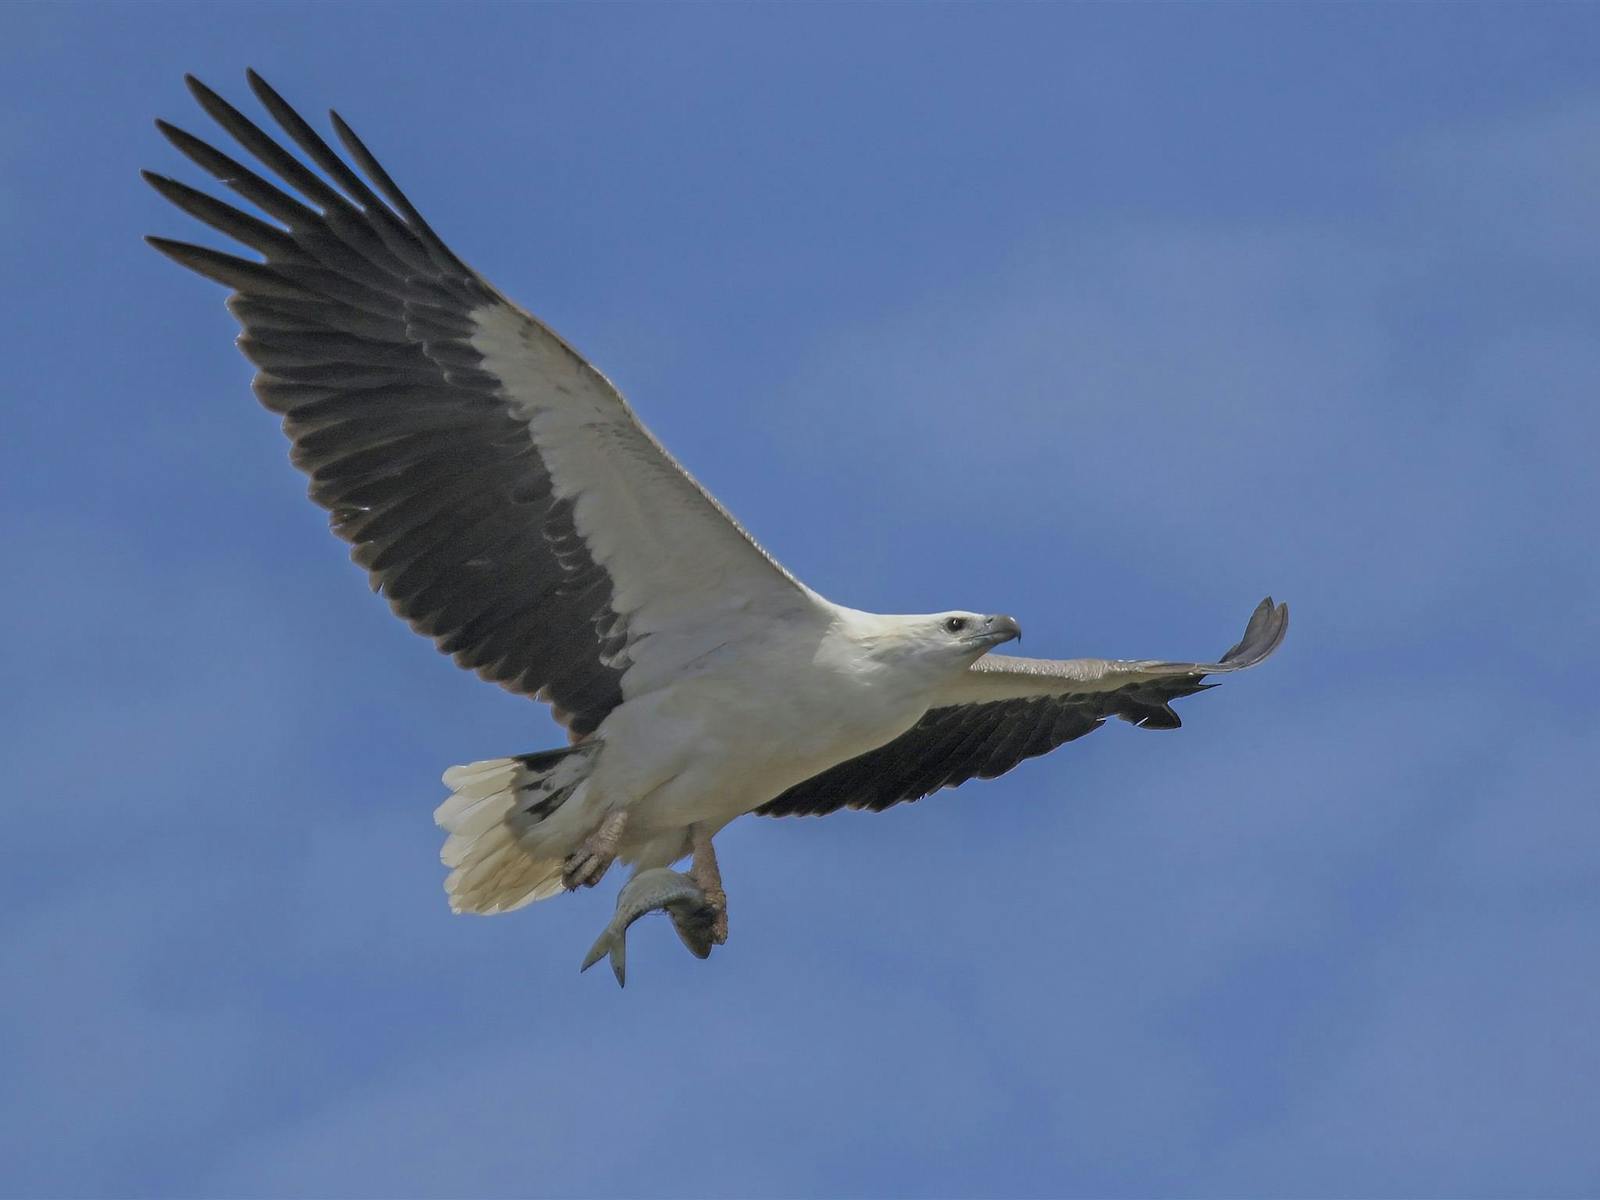 White-breasted sea eagle flying to nest with fish